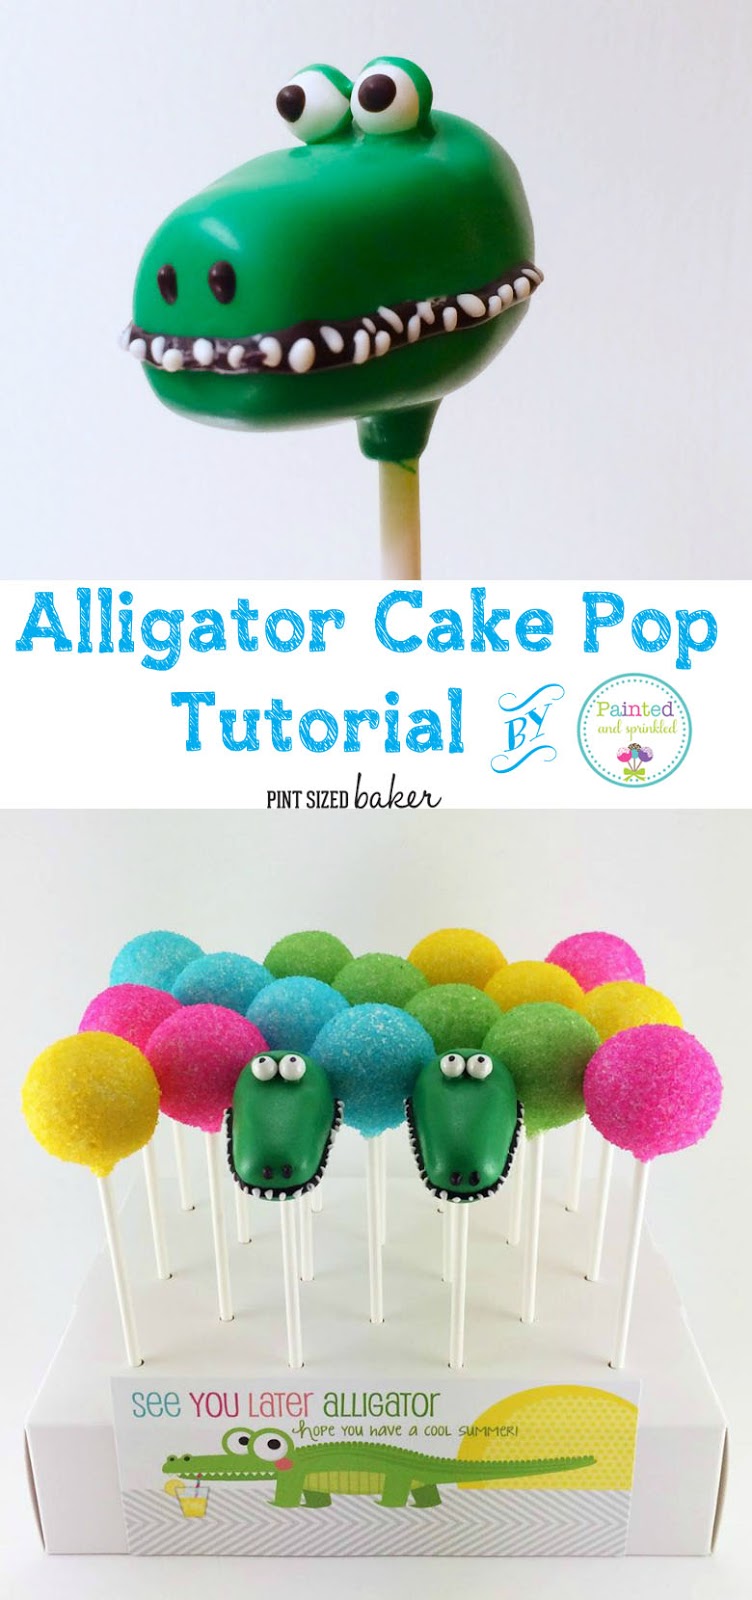 I've got to make these adorable Alligator Cake Pops for my little boy's next party! Then I'll make them for my Gator fan during football season!